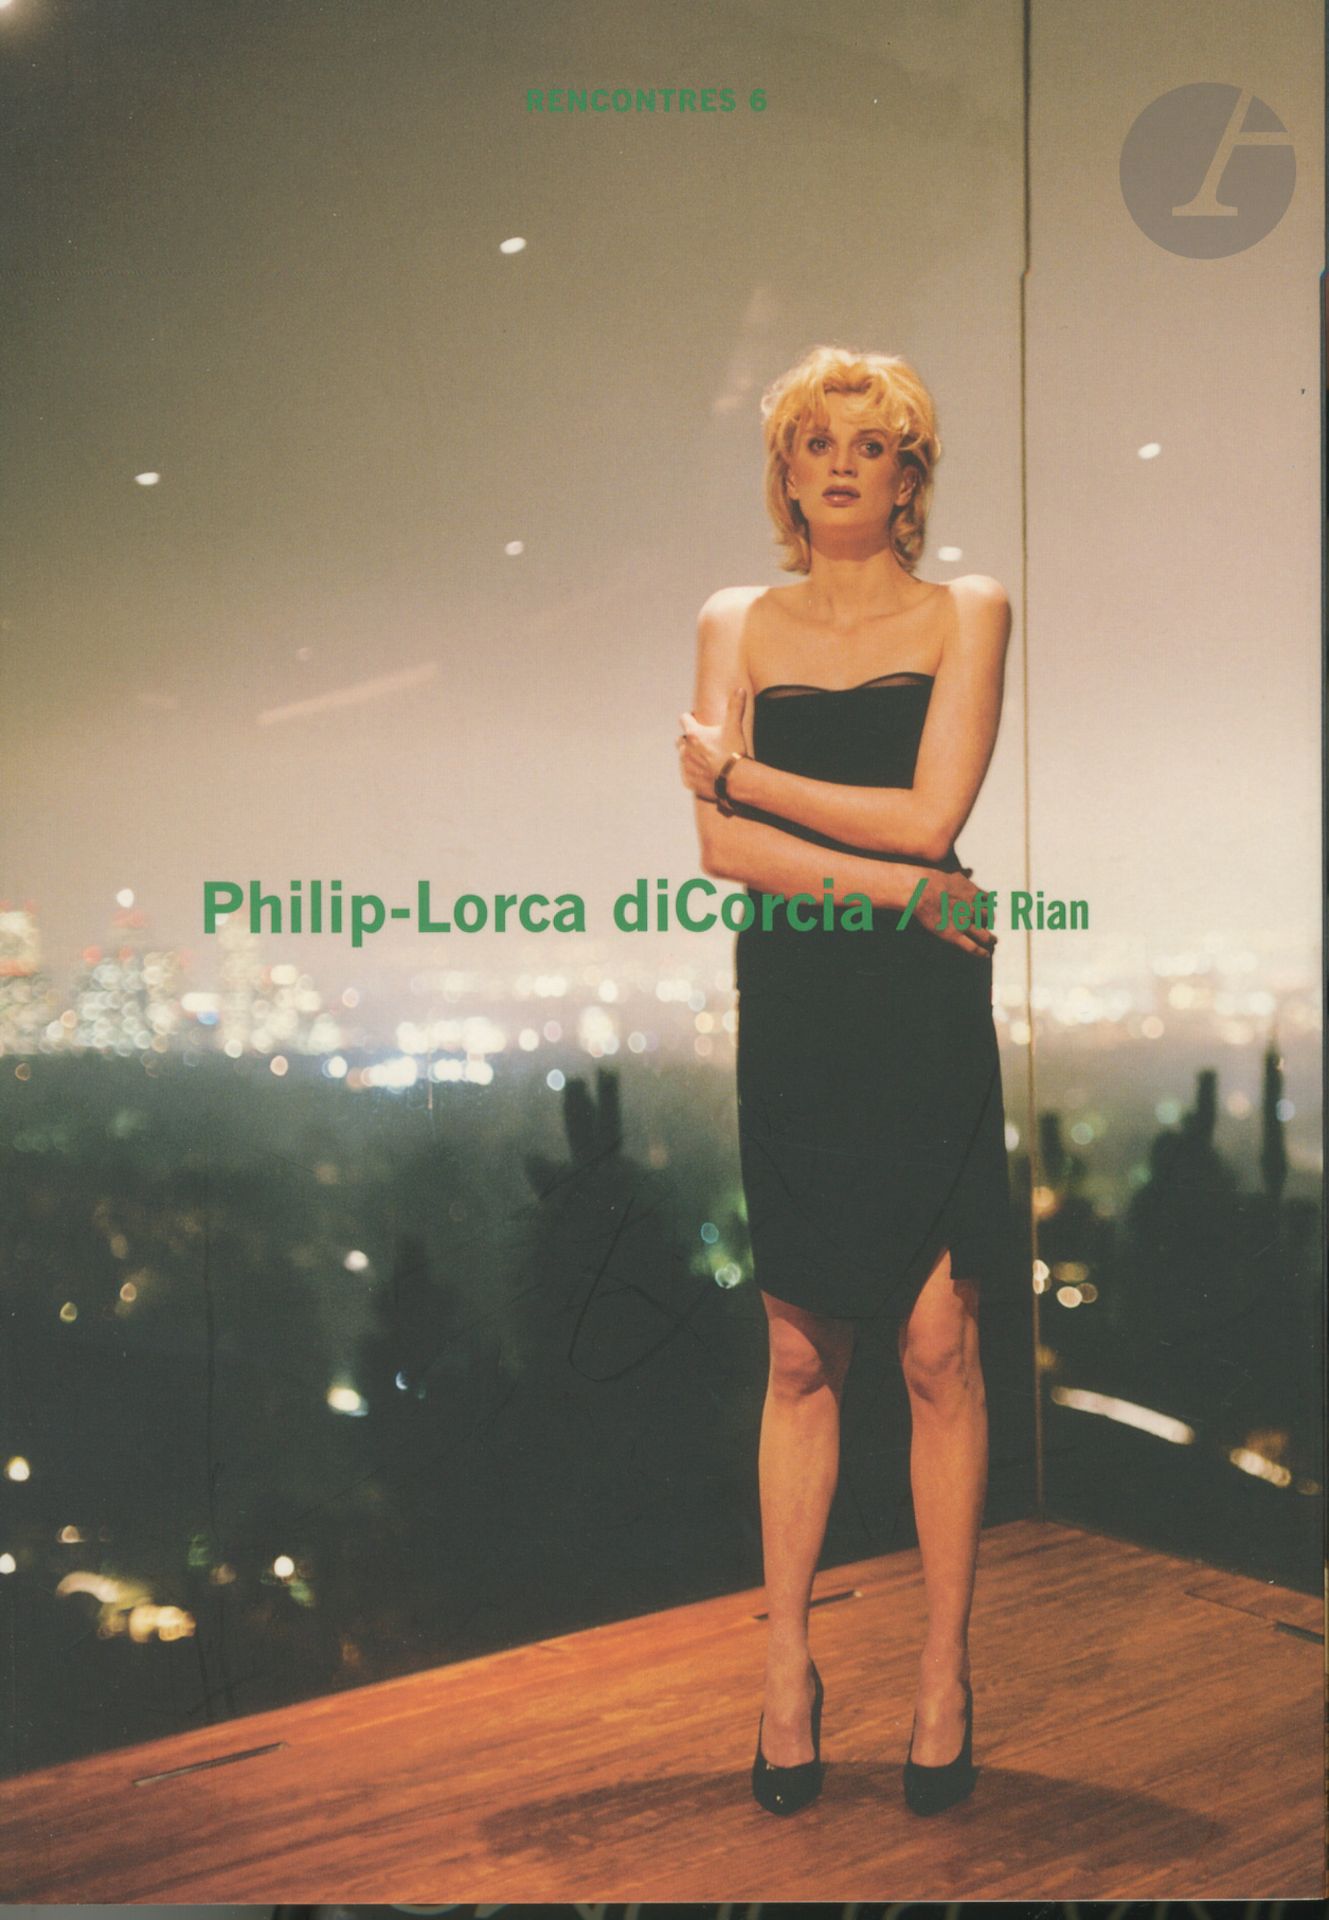 Null DICORCIA, PHILIP-LORCA (1951)
Œil à gages. Hired Eye.
Almine Rech Editions,&hellip;